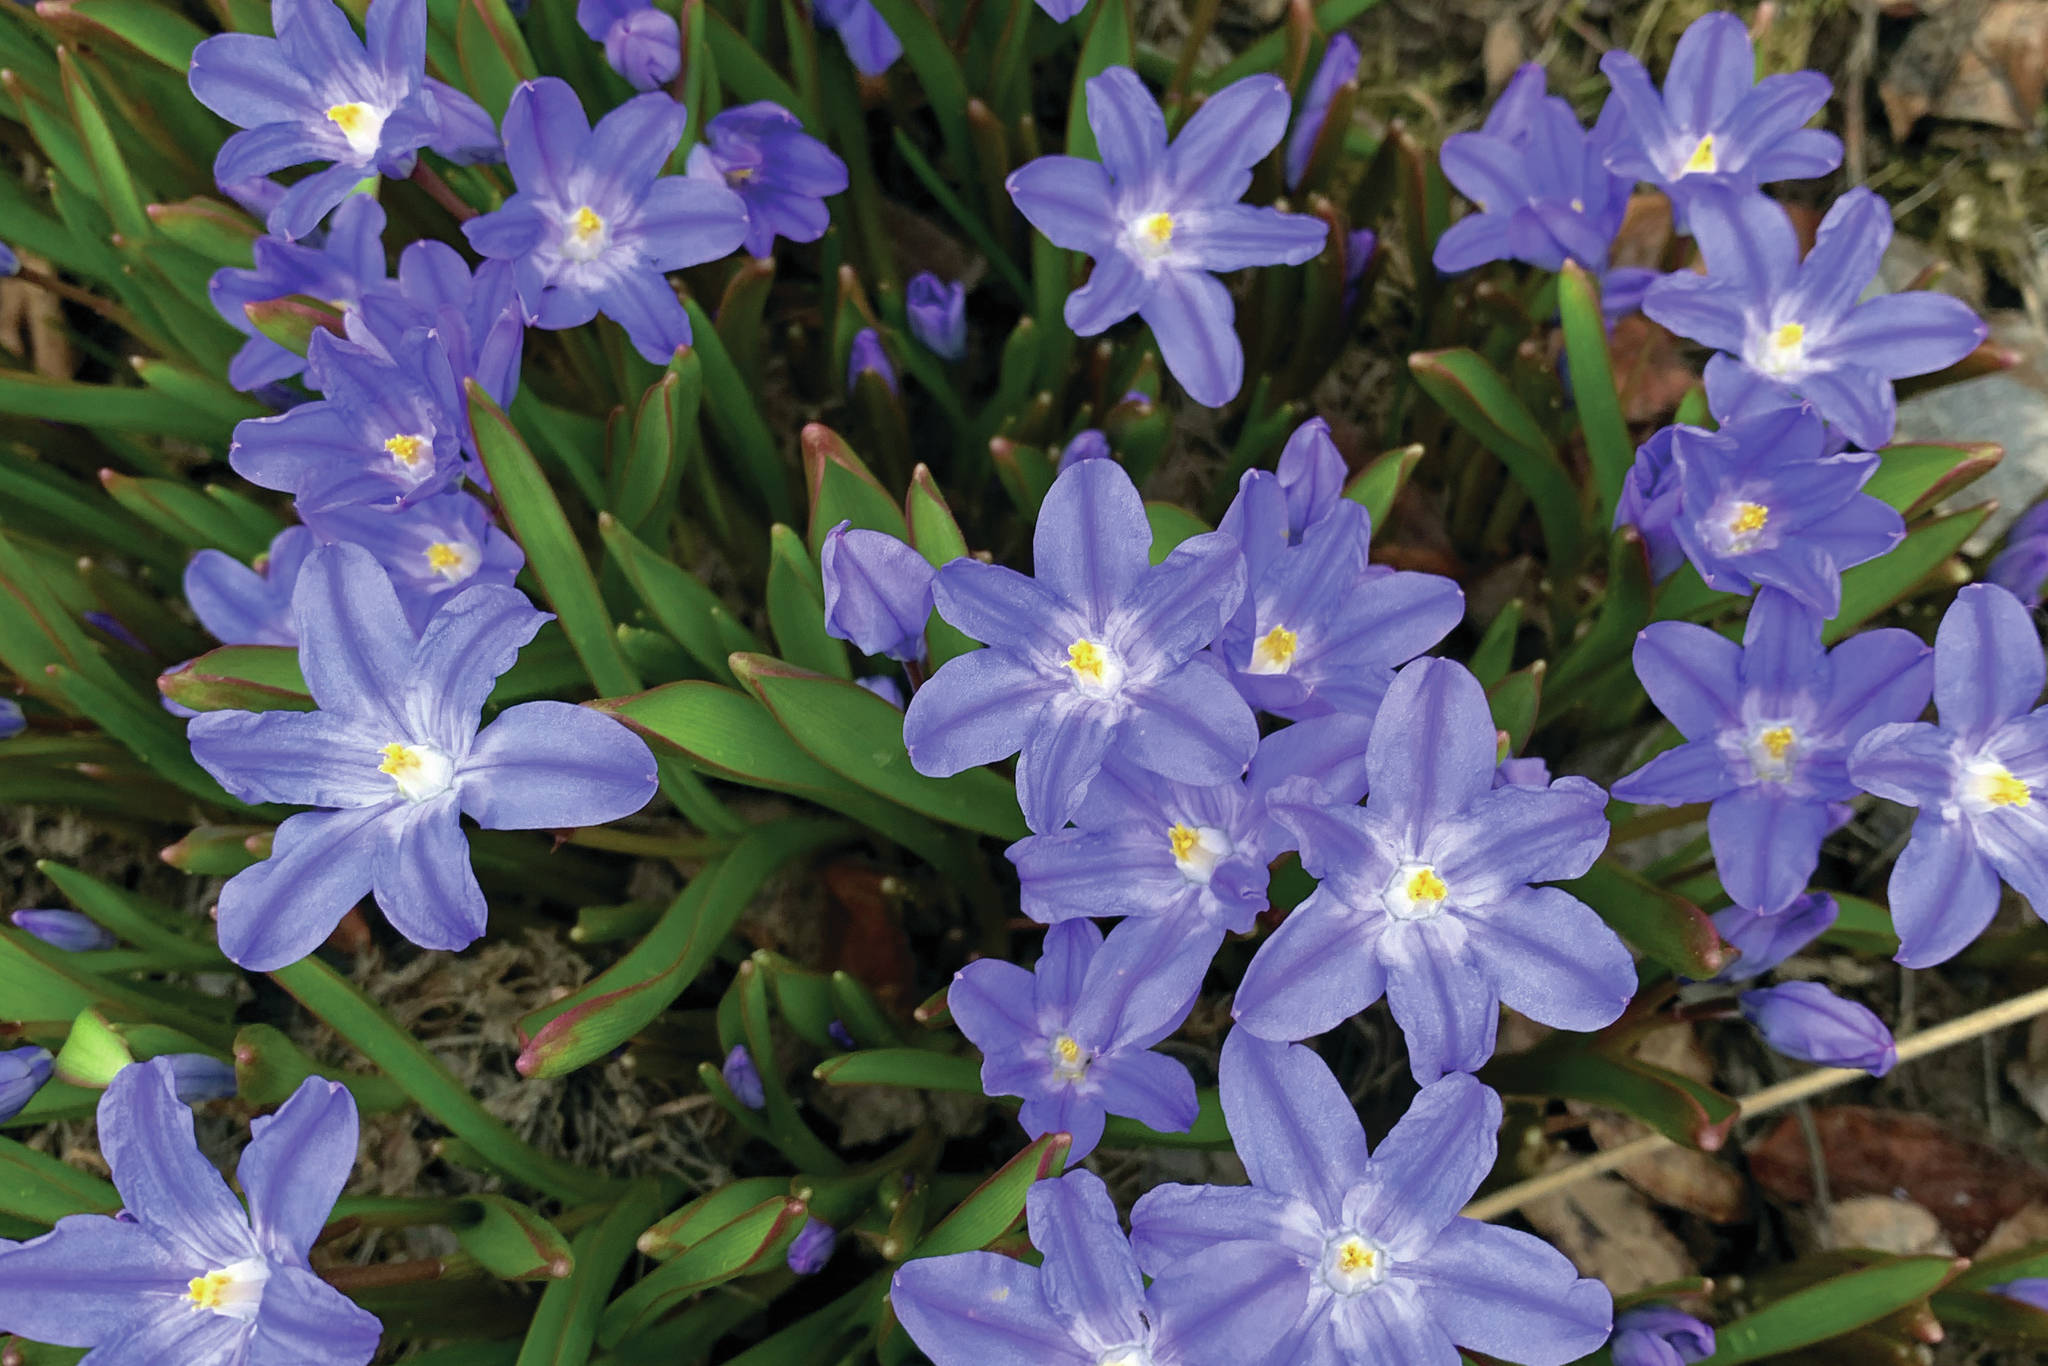 Chionodoxa is a reliable and early minor bulb, as seen here in the Kachemak Gardener's garden on May 9, 2021, in Homer, Alaska. (Photo by Rosemary Fitzpatrick)